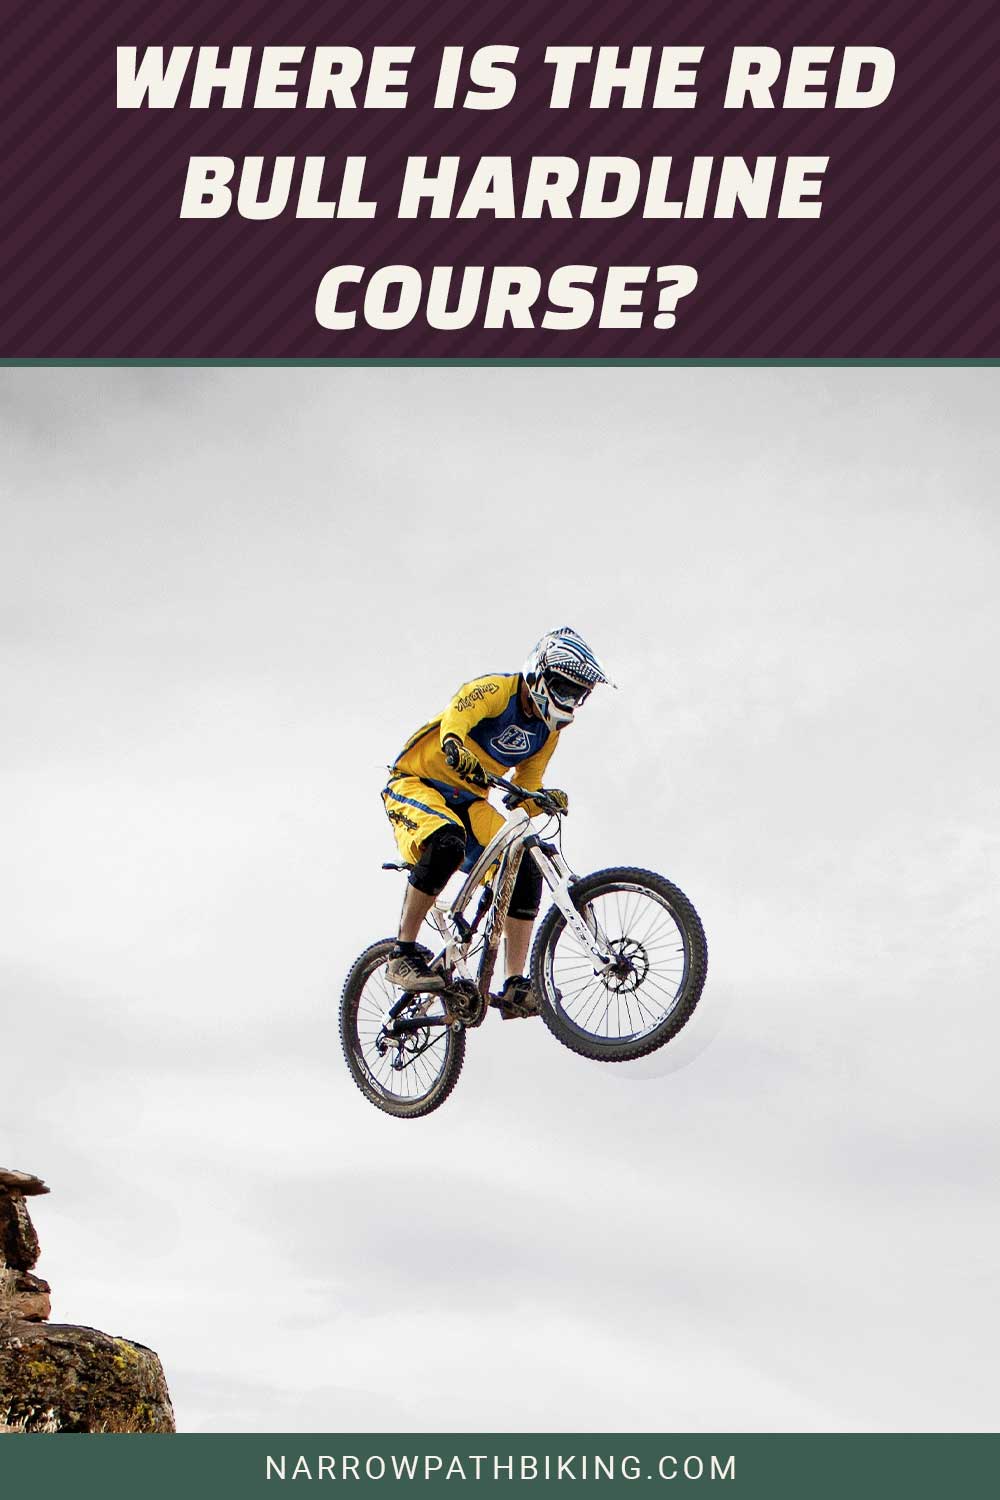 Person wearing yellow jersey jumping with an MTB - Where is the Red Bull Hardline Course?